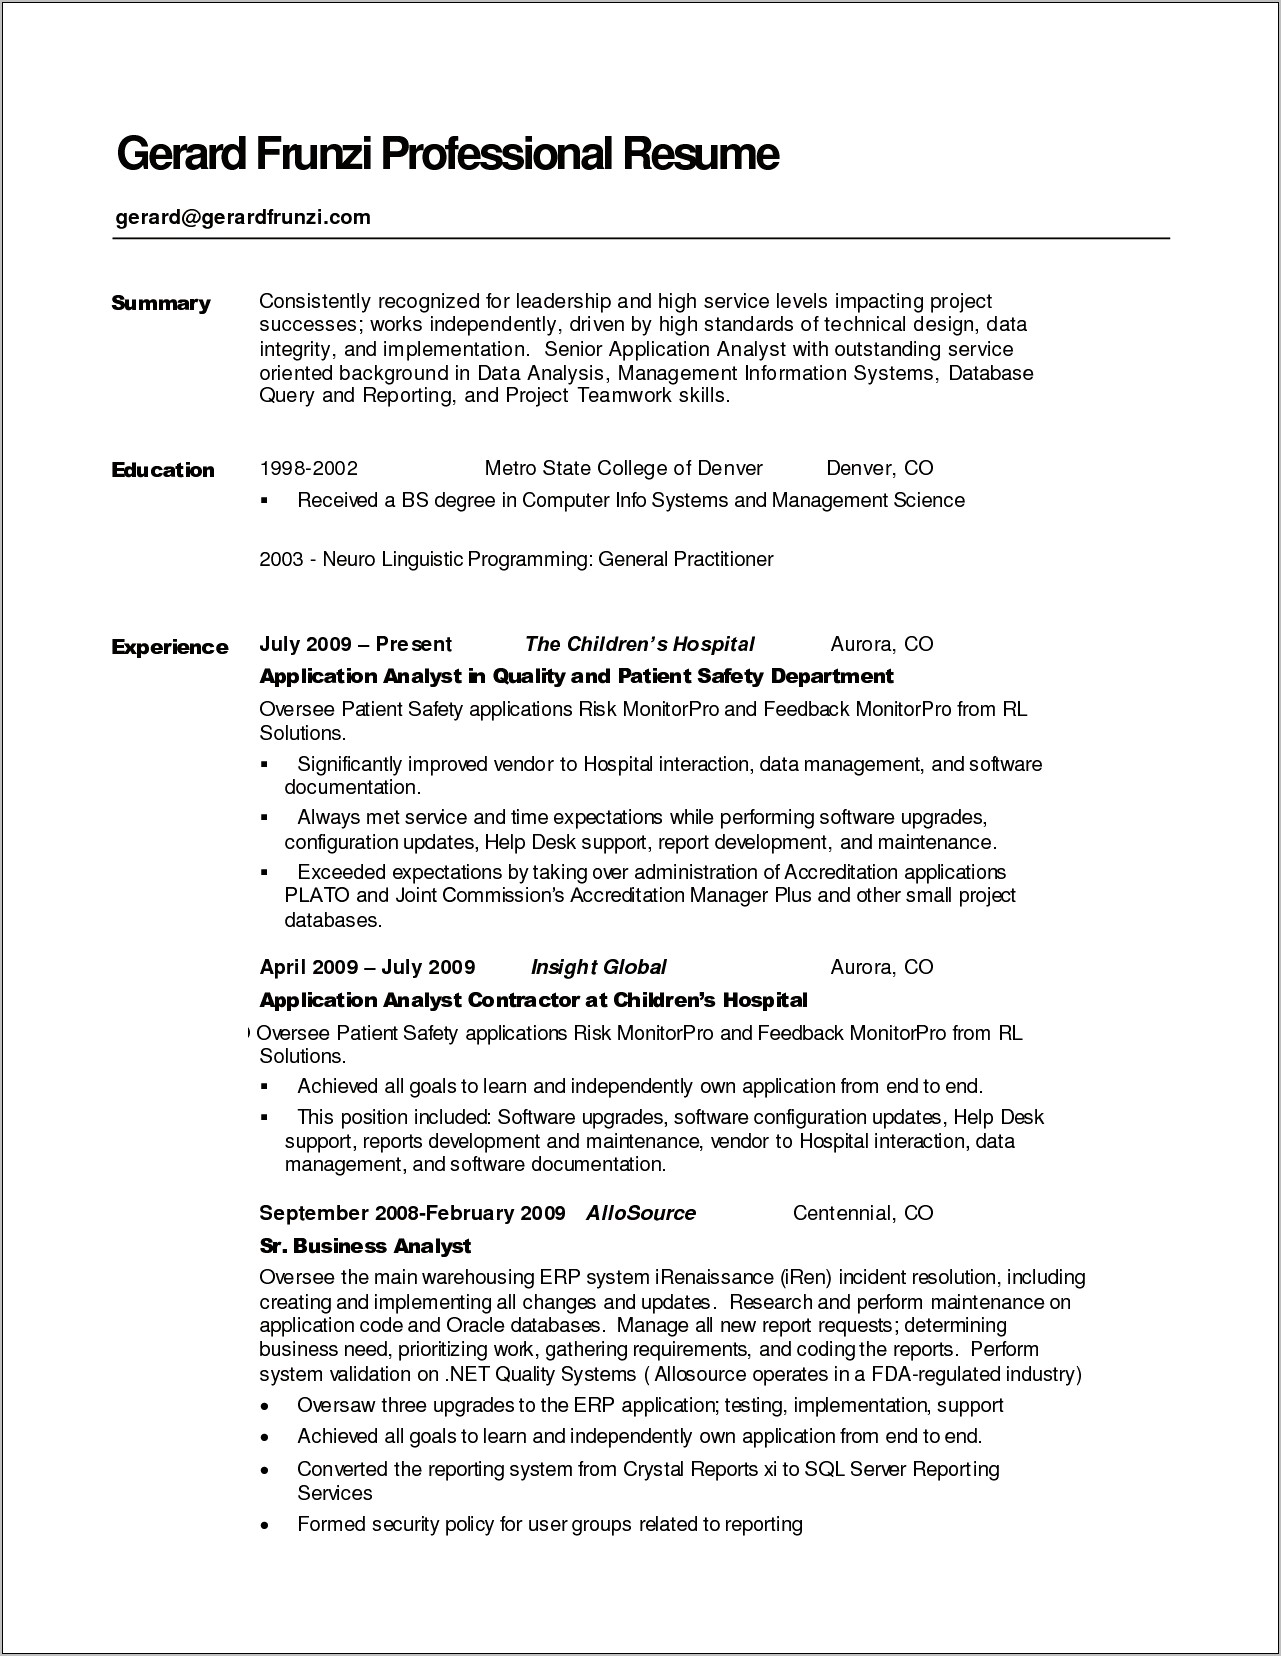 Examples Of Summary's On A Resume